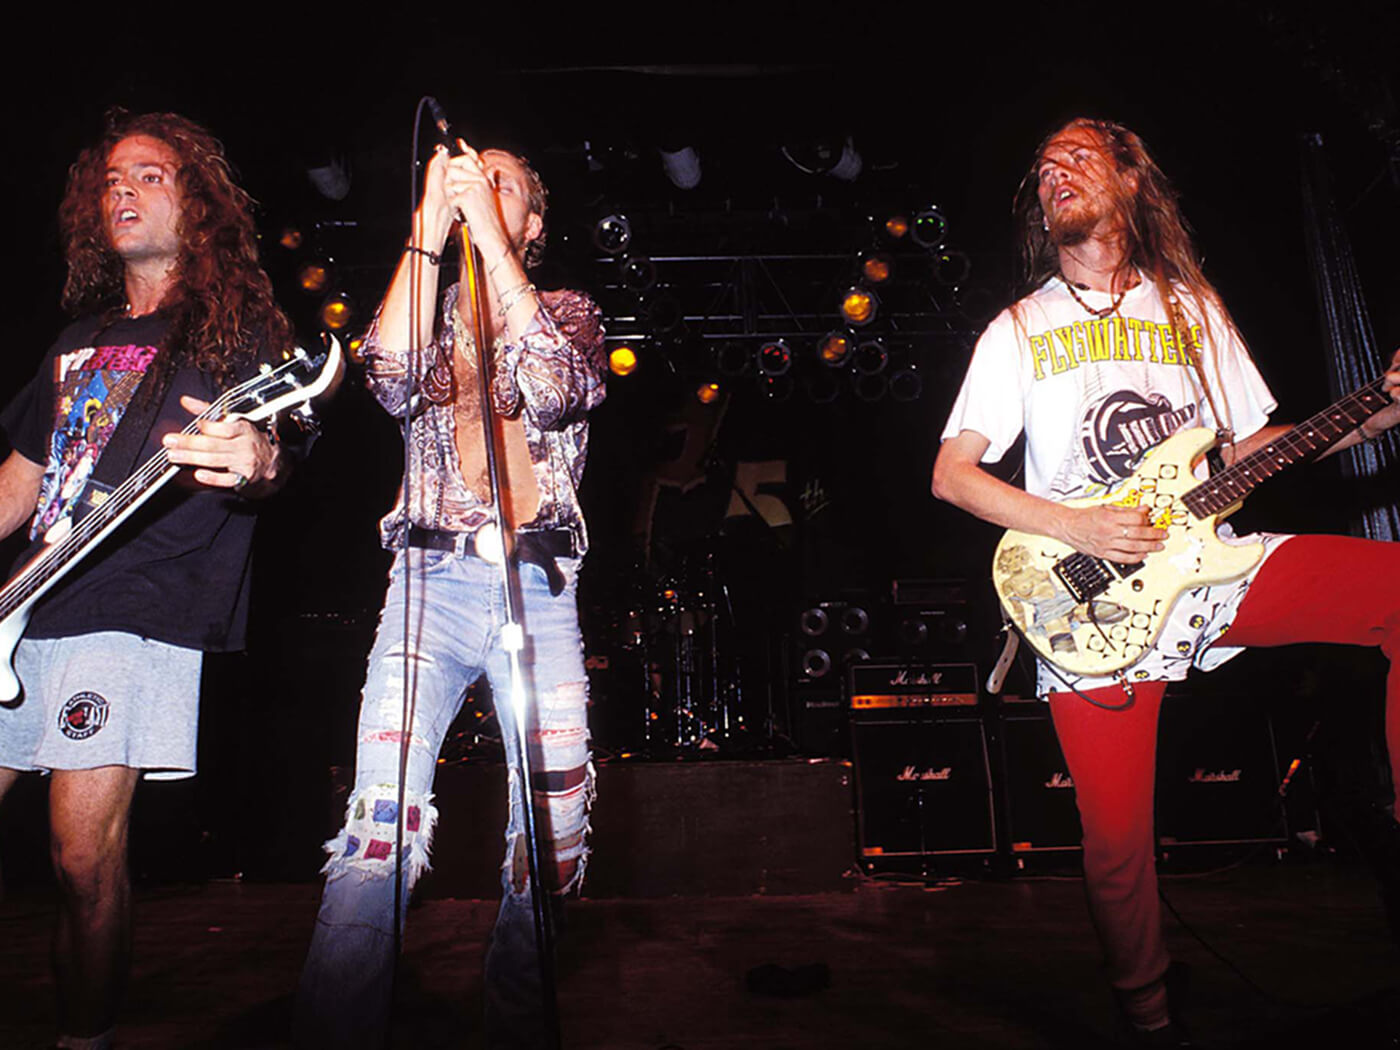 Mike Starr, Layne Stanley and Jerry Cantrell of Alice in Chains performing in 1991, photo by Jeff Kravitz/FilmMagic via Getty Images